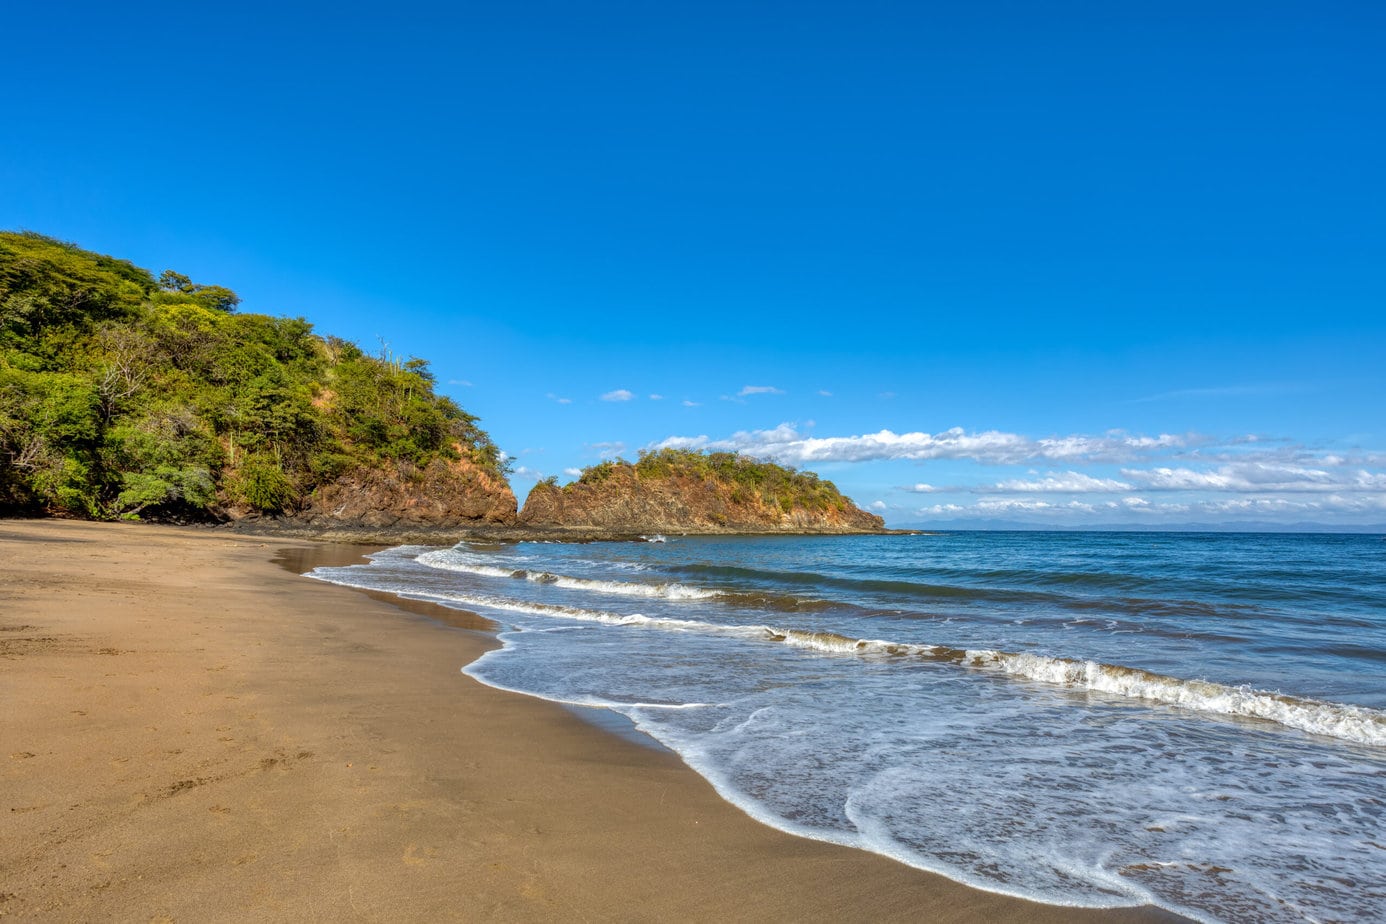 Best Time to Visit Costa Rica